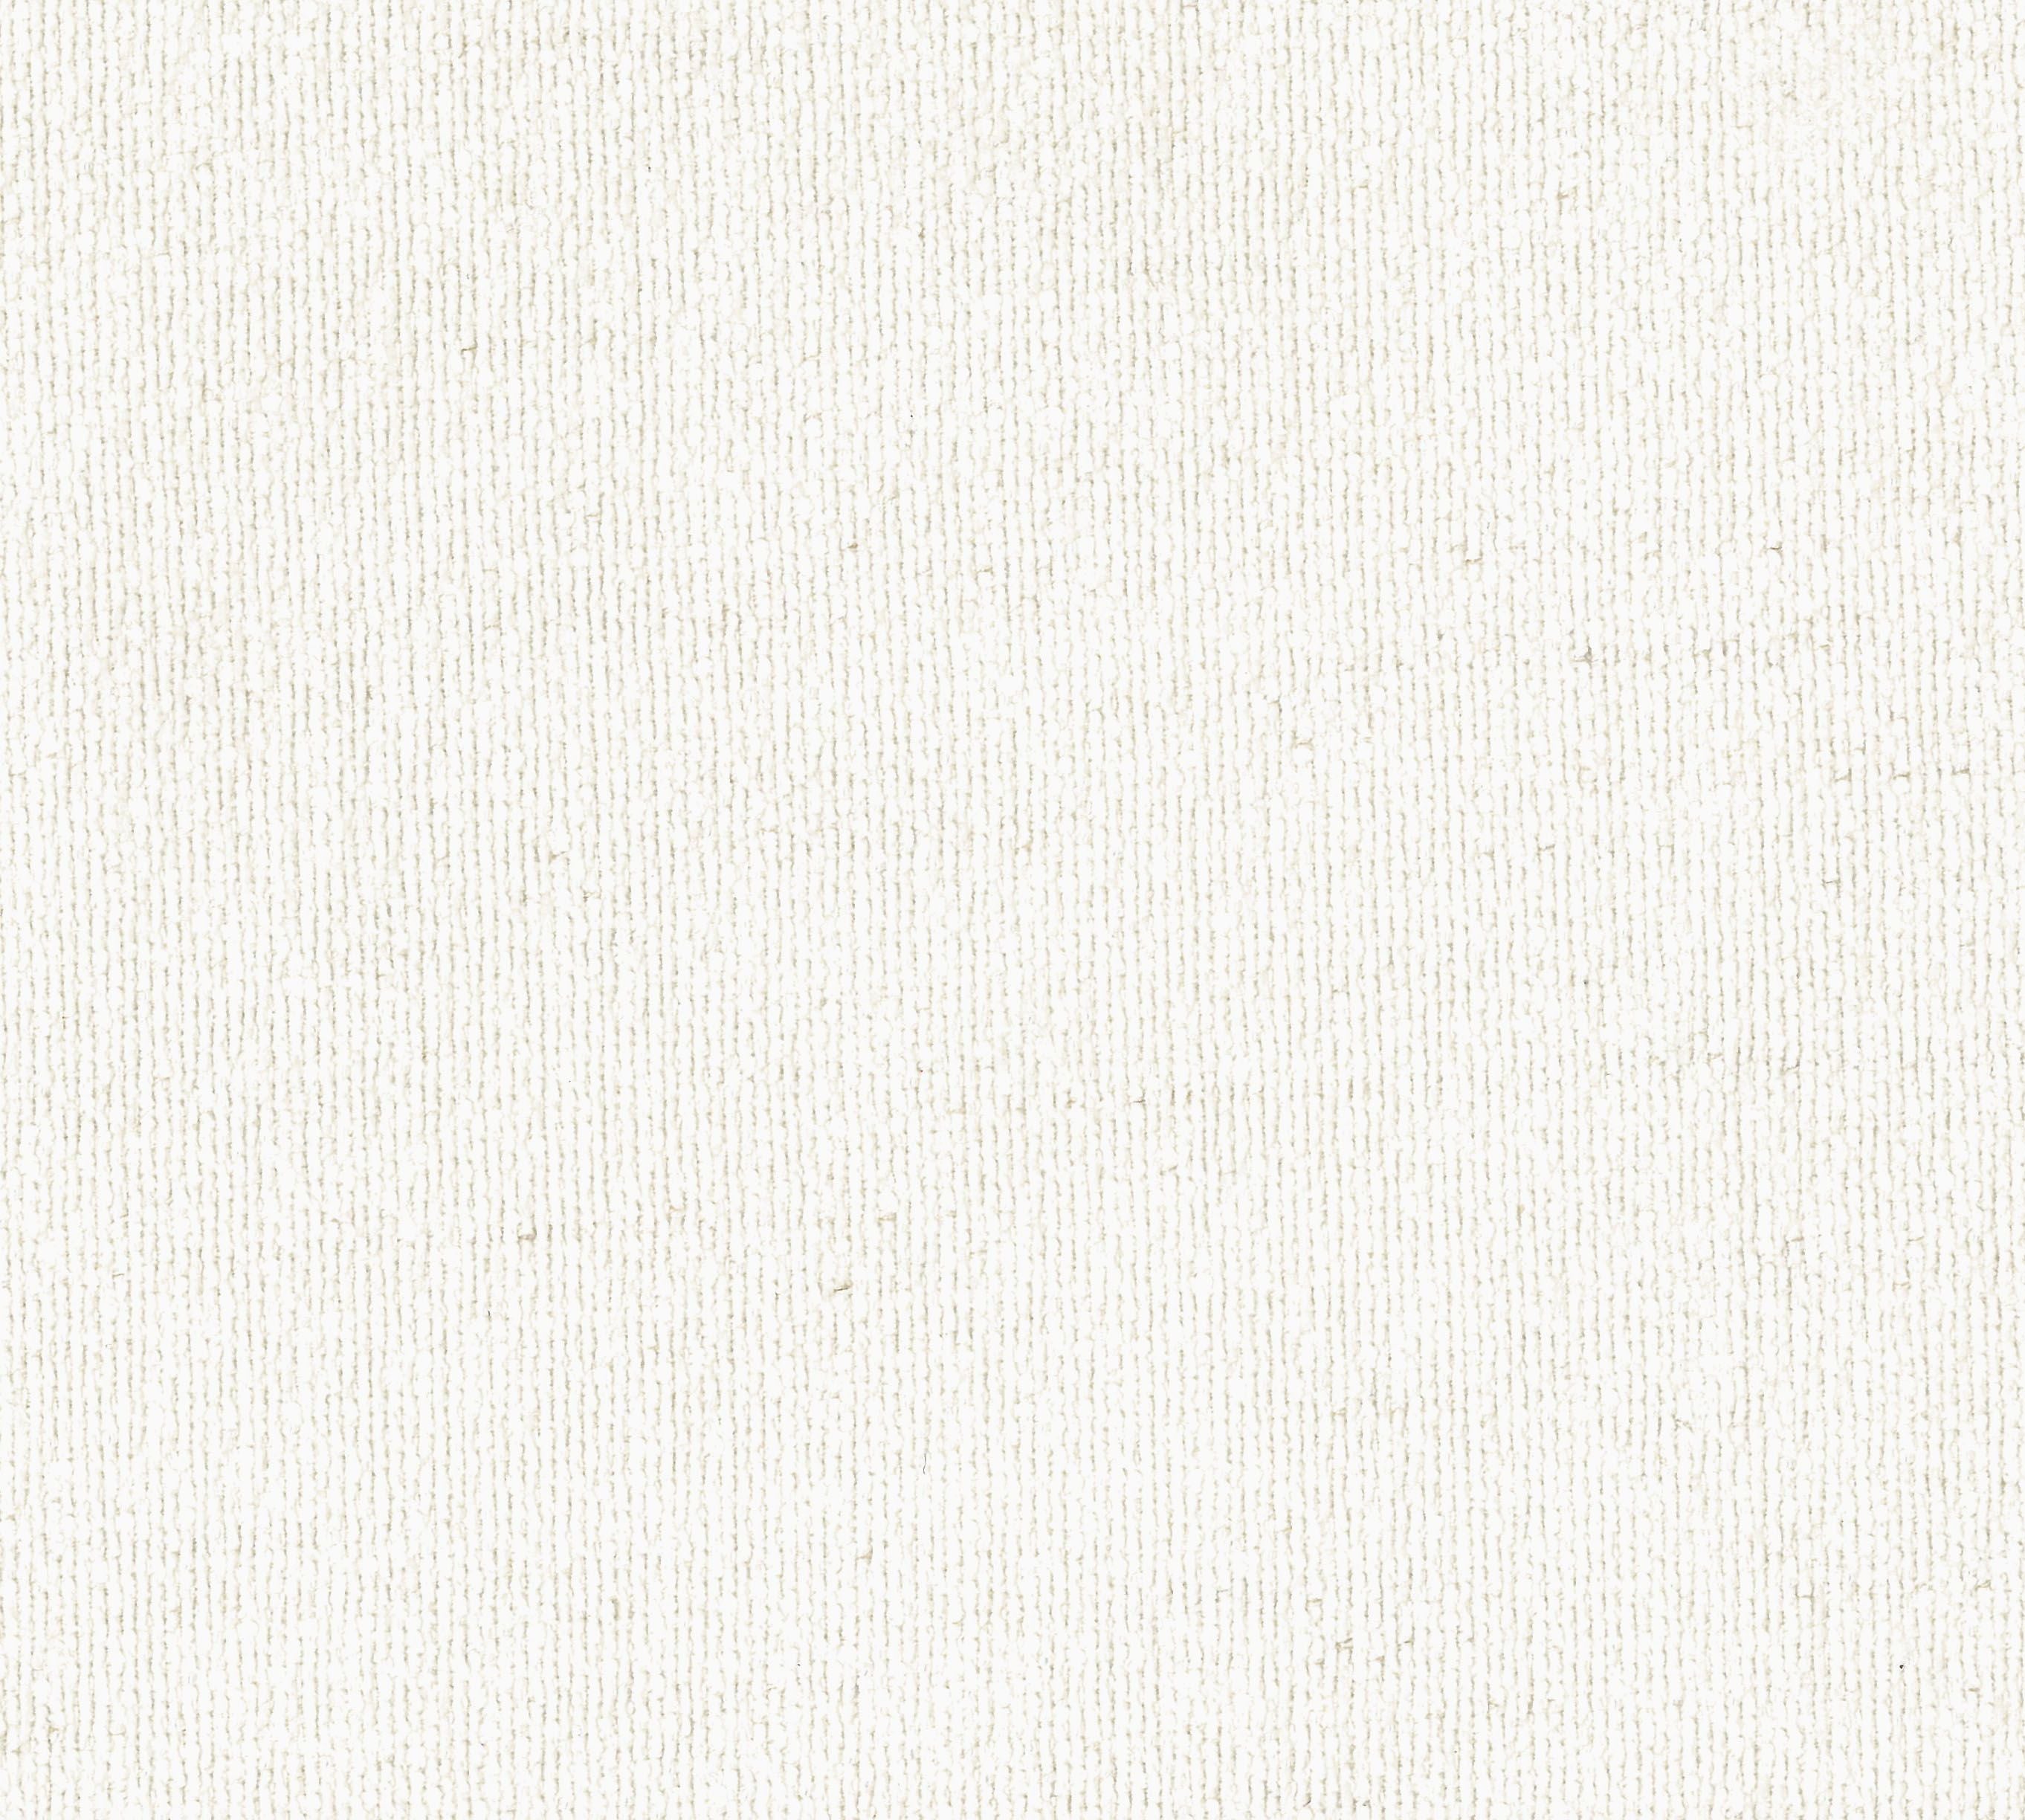 San Miguel Texture fabric in arctic color - pattern number LU 00018257 - by Scalamandre in the Old World Weavers collection